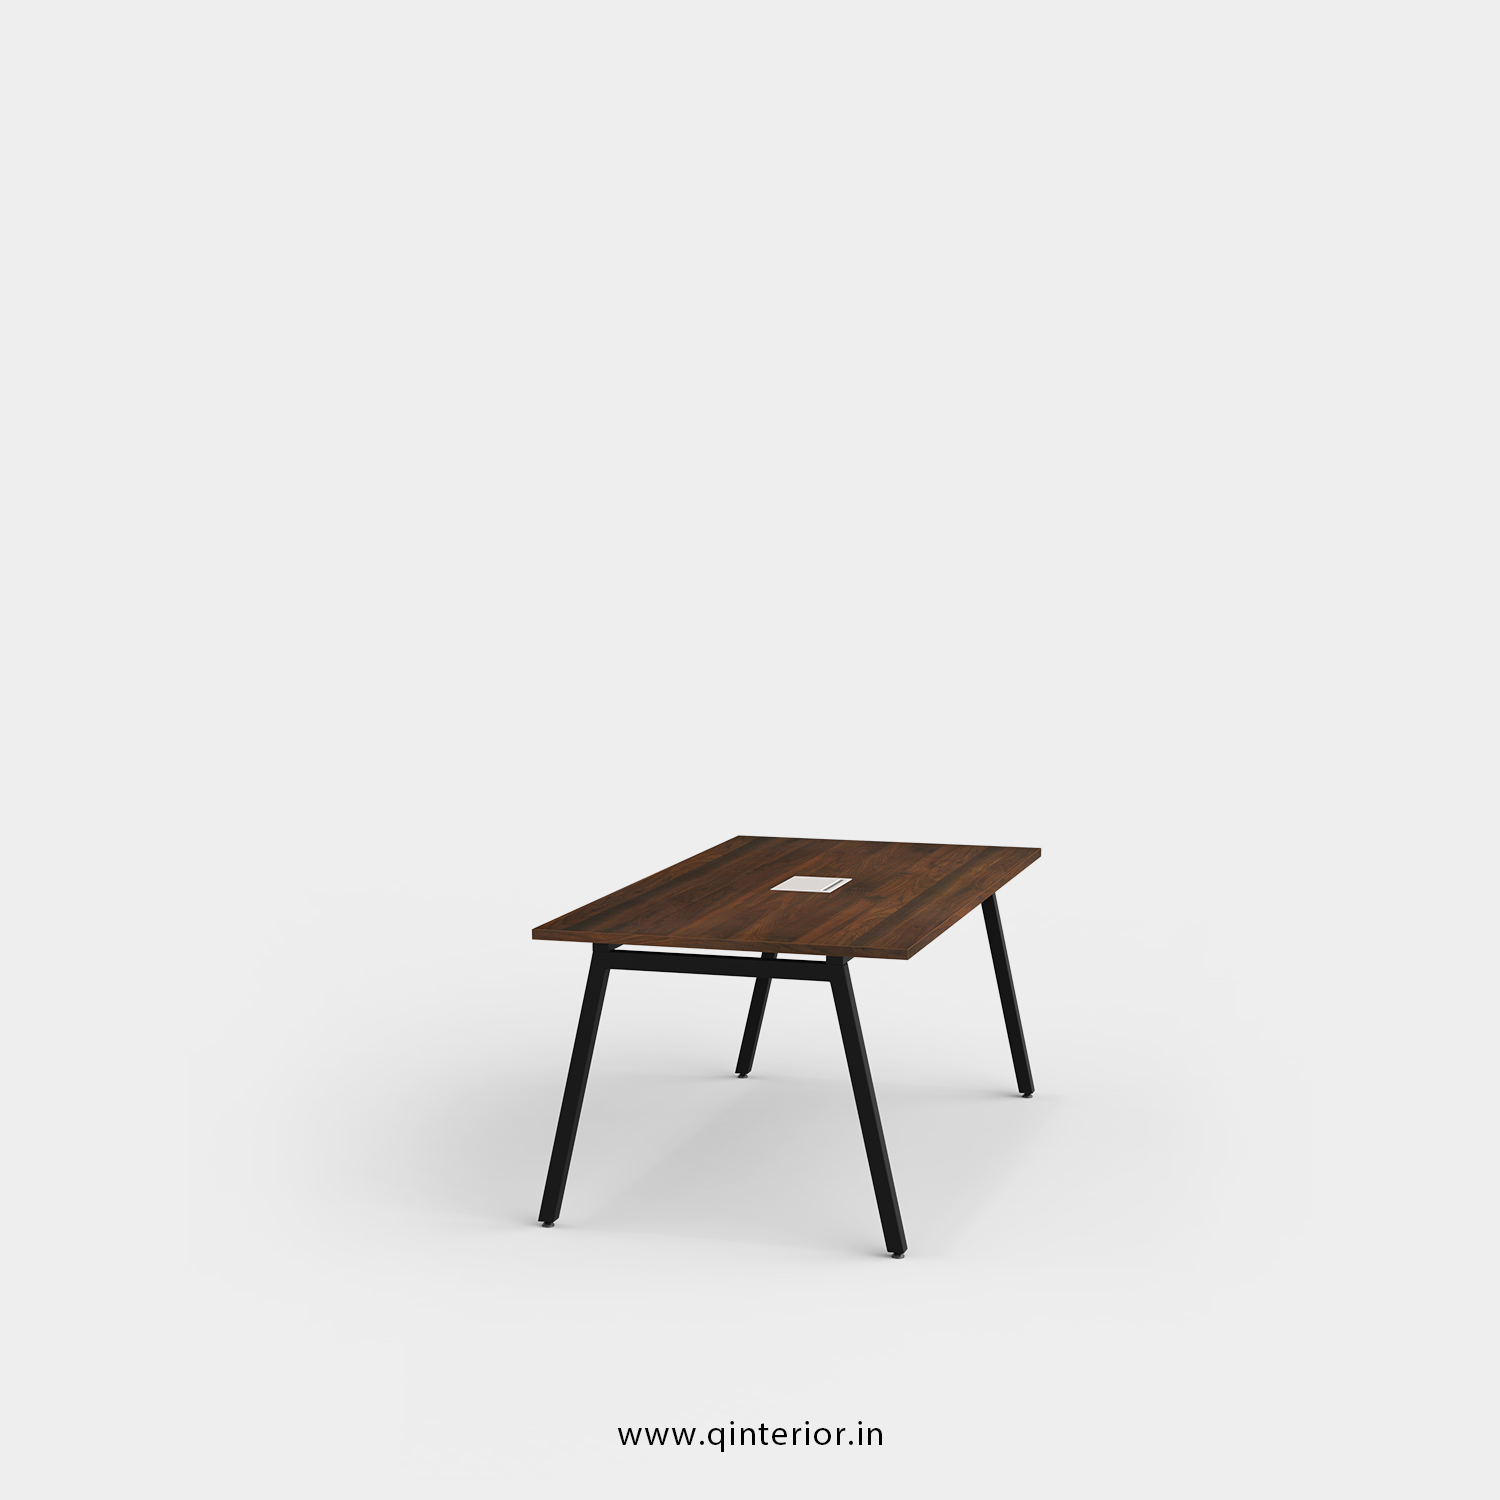 Berg Meeting Table in Walnut Finish – OMT001 C1